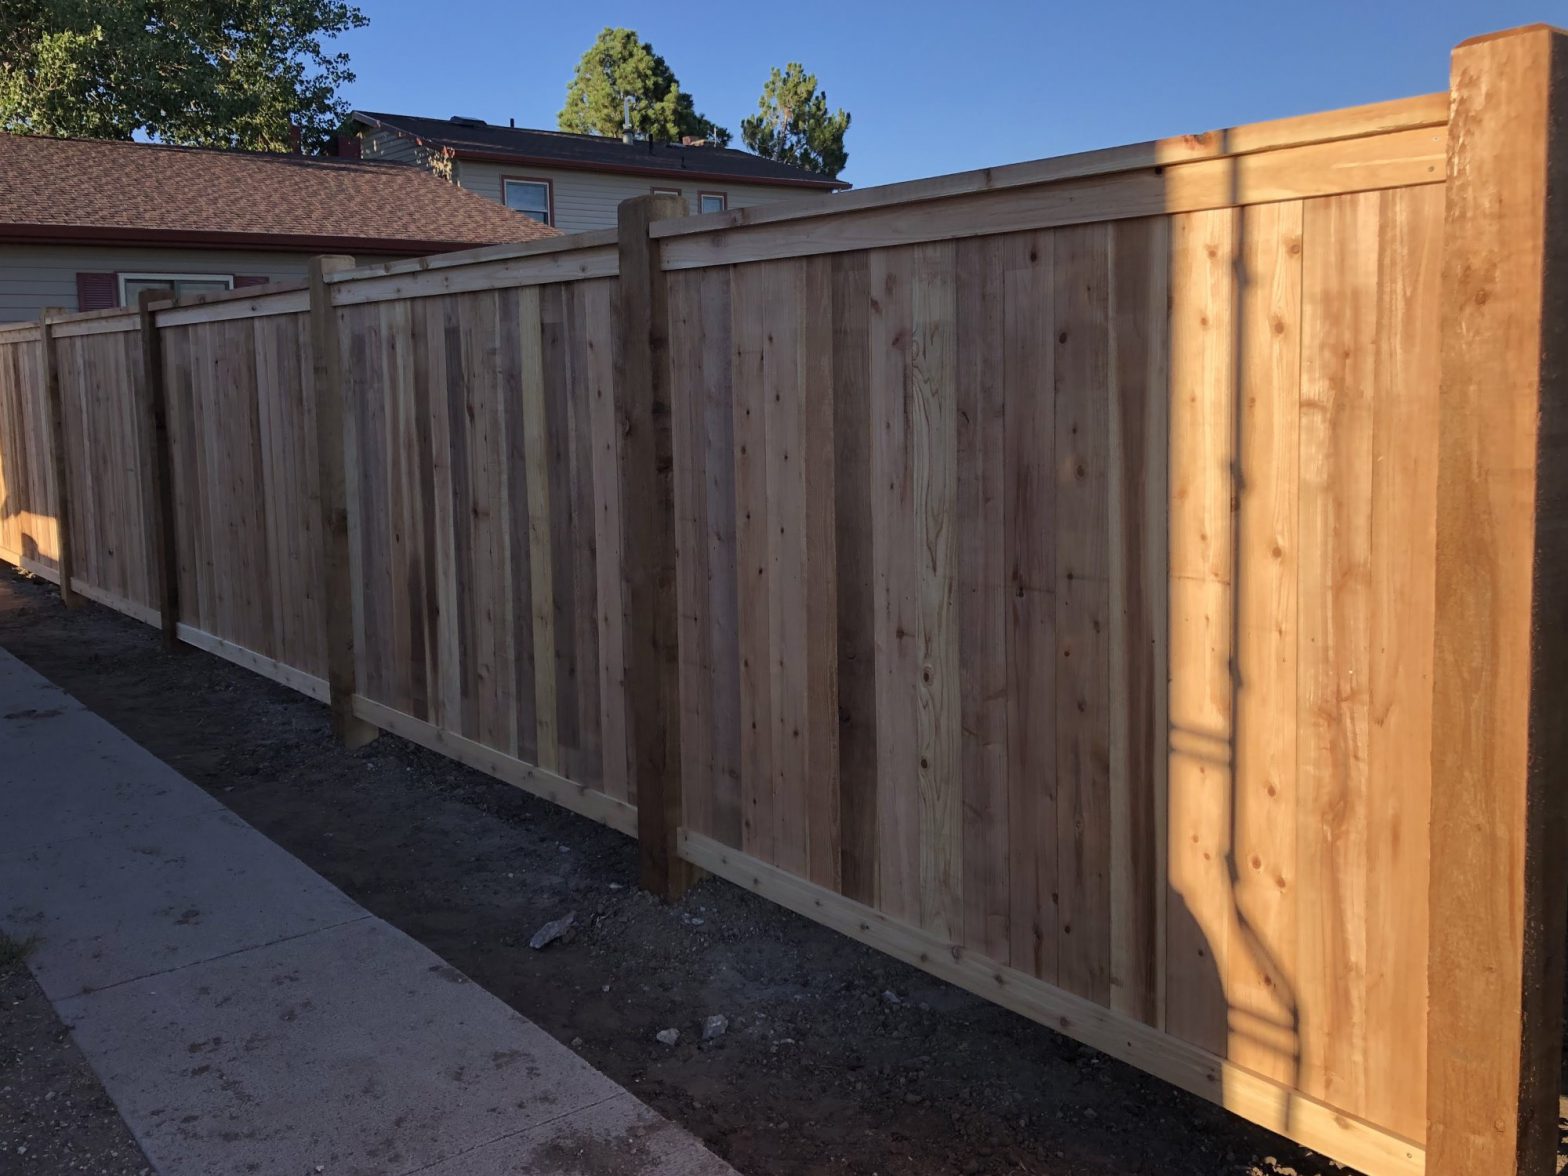 The Safest Wyoming Fences for Your Dog